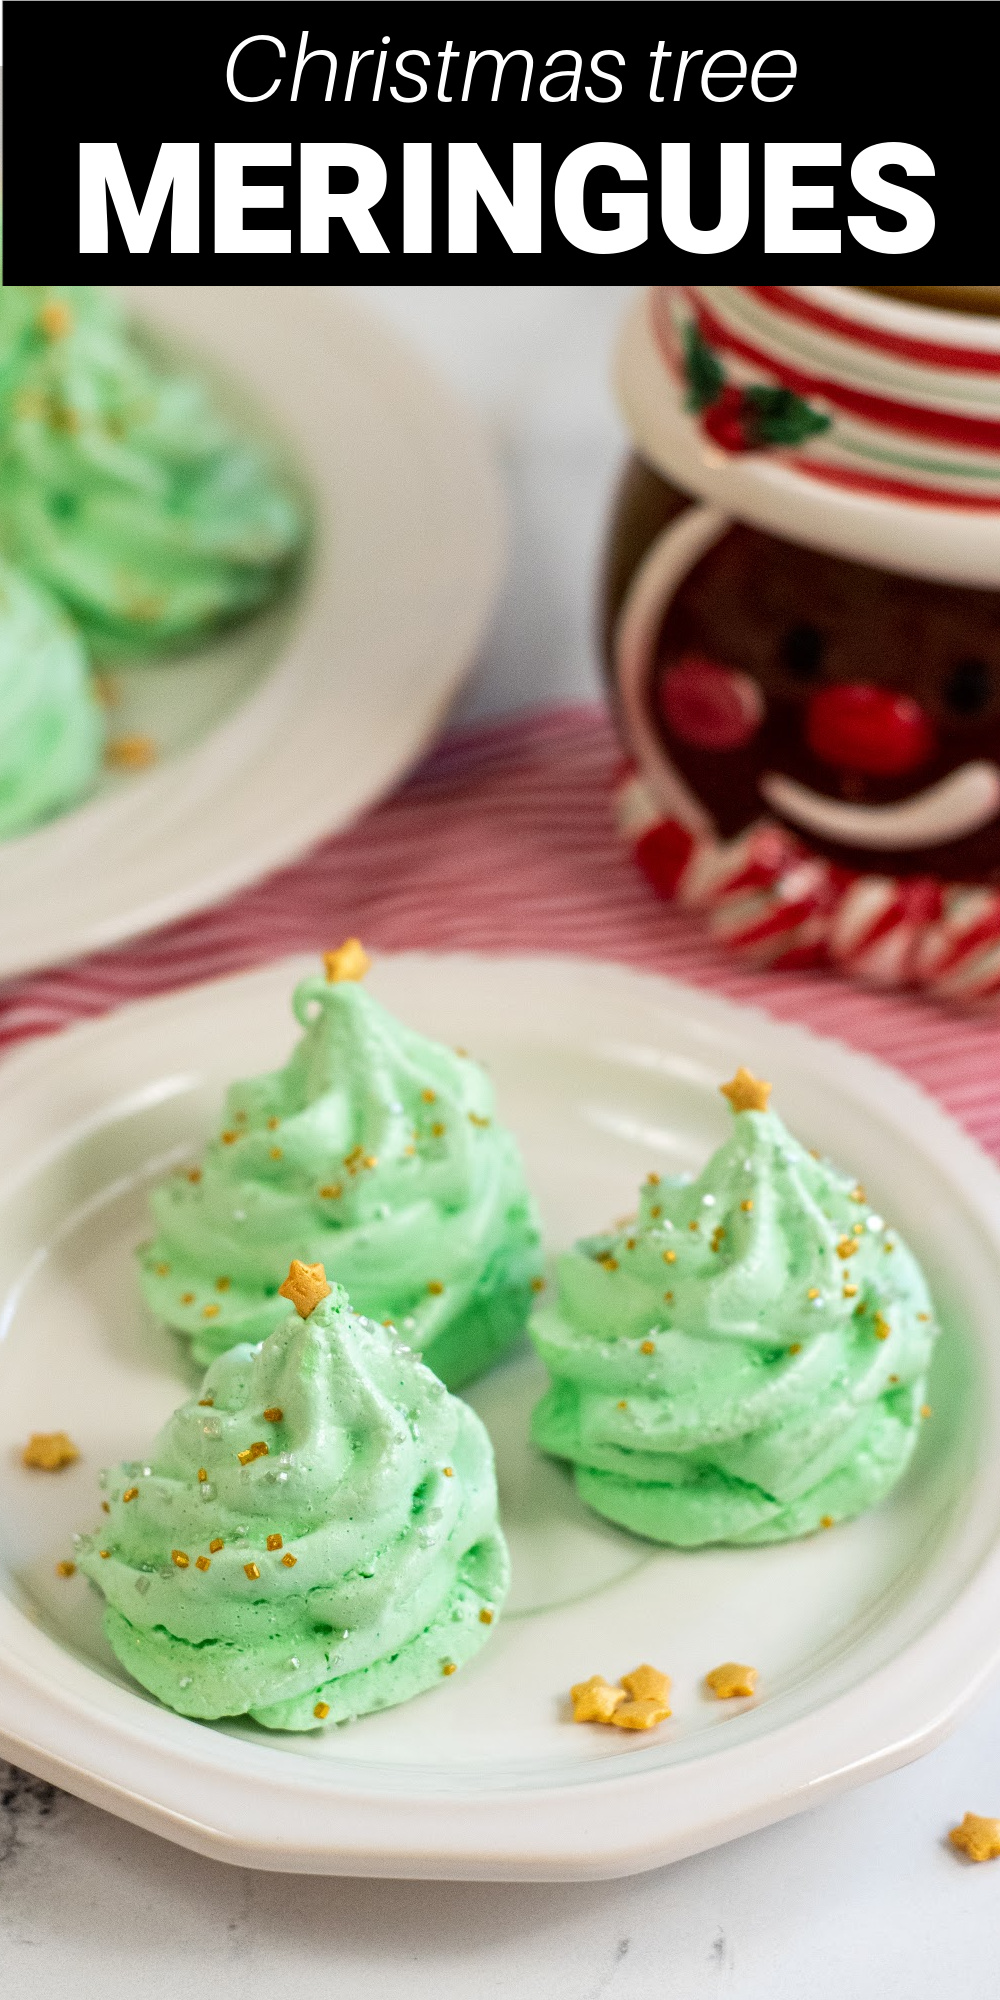 These easy Christmas tree meringues are a simple, airy Christmas cookie everyone loves.